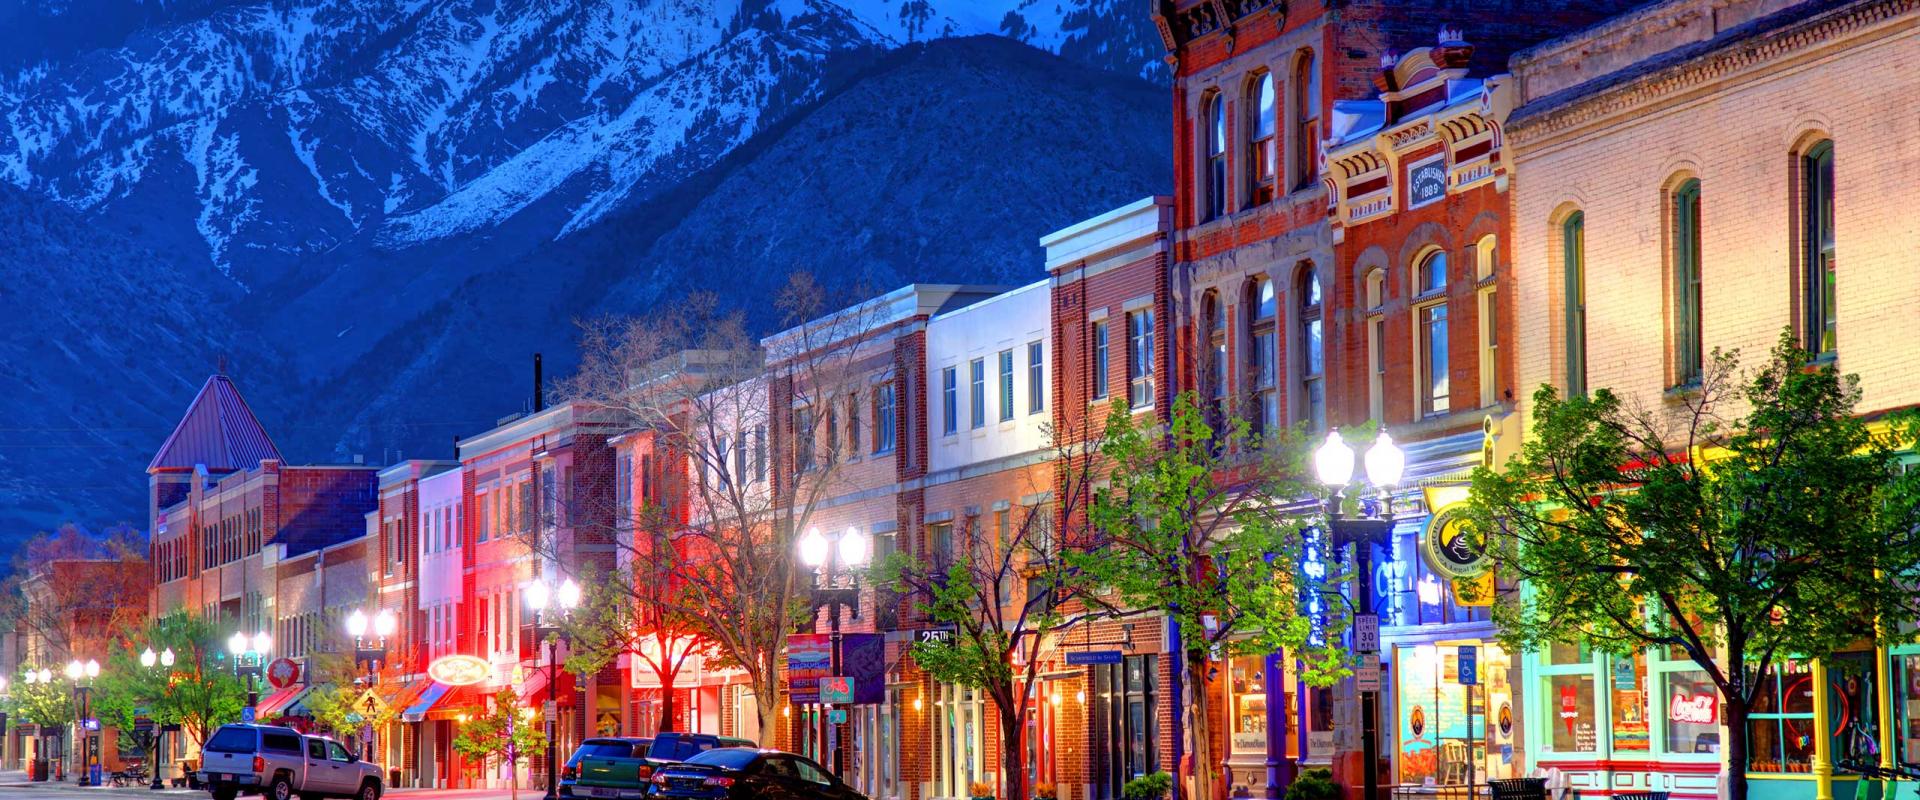 A view of the Ogden, Utah